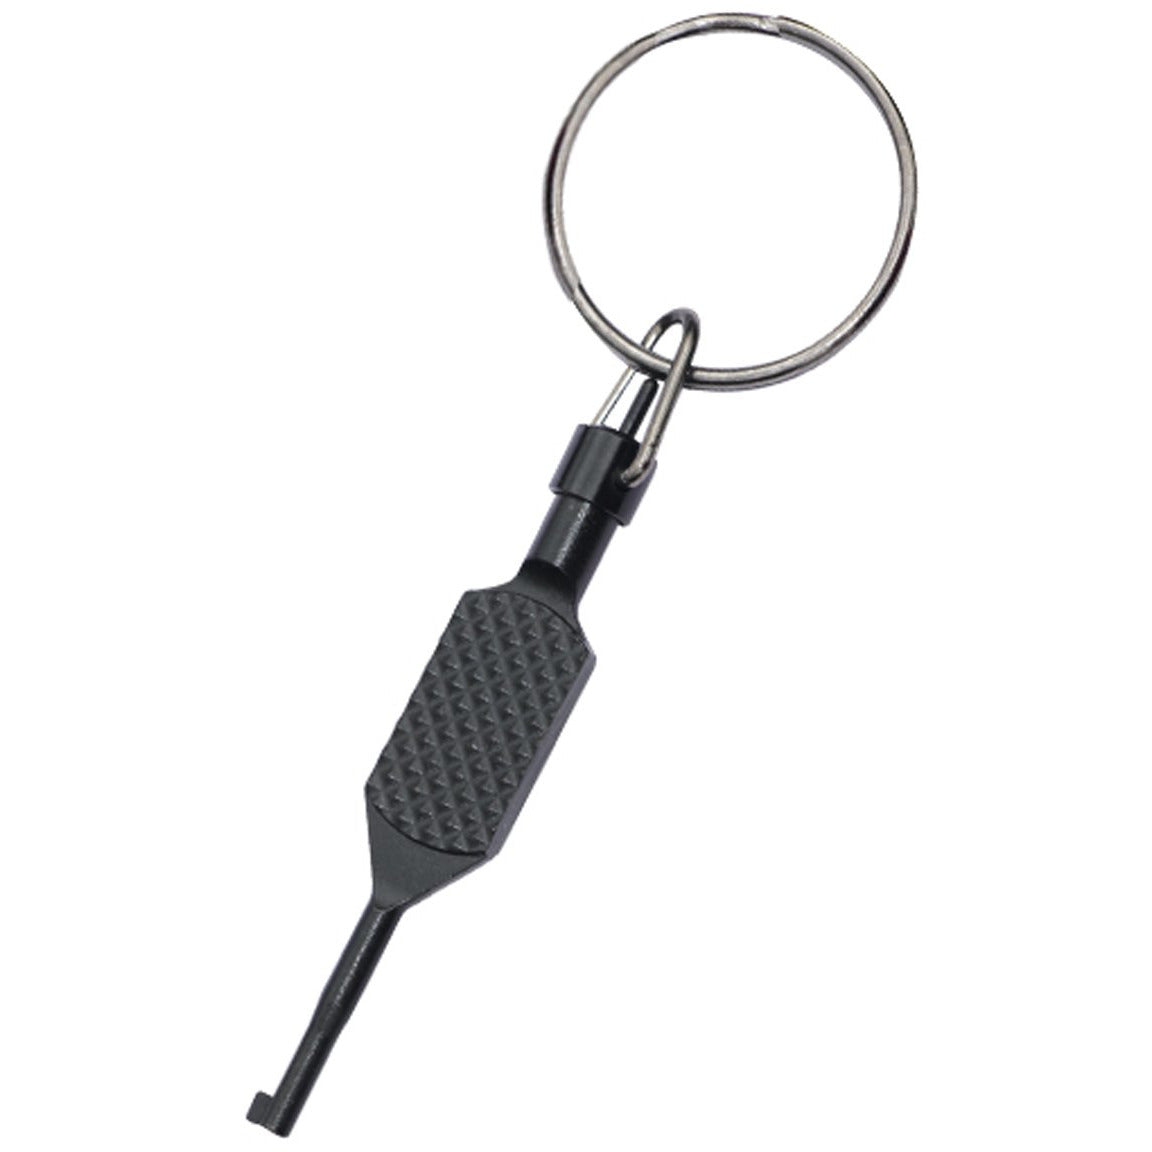 Enforcer universal handcuff wrench wide with key ring